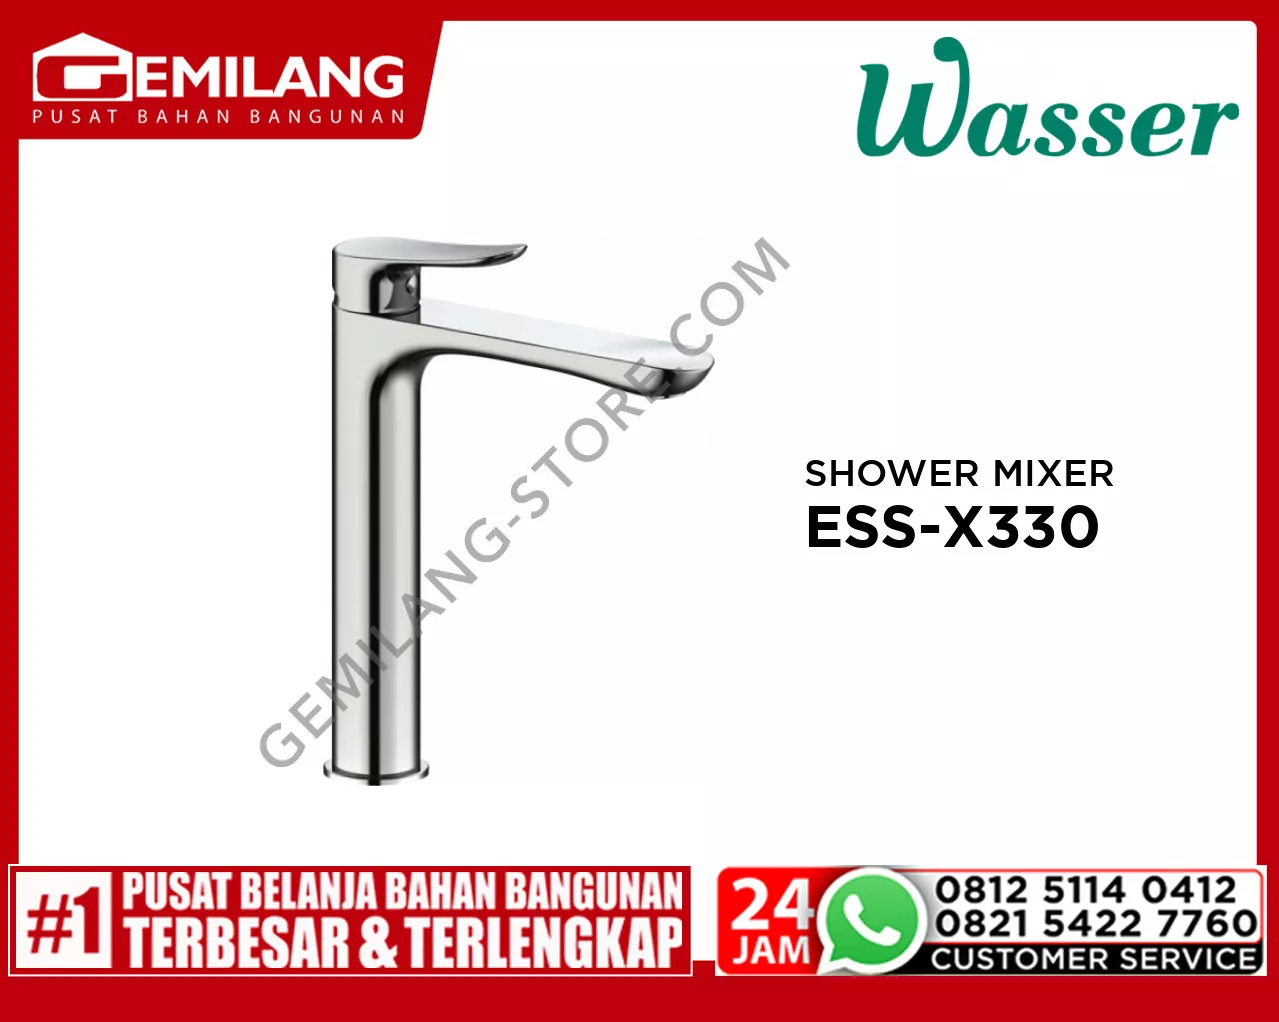 WASSER SHOWER MIXER SYSTEM WITH SWIVEL SPOUT ESS-X330